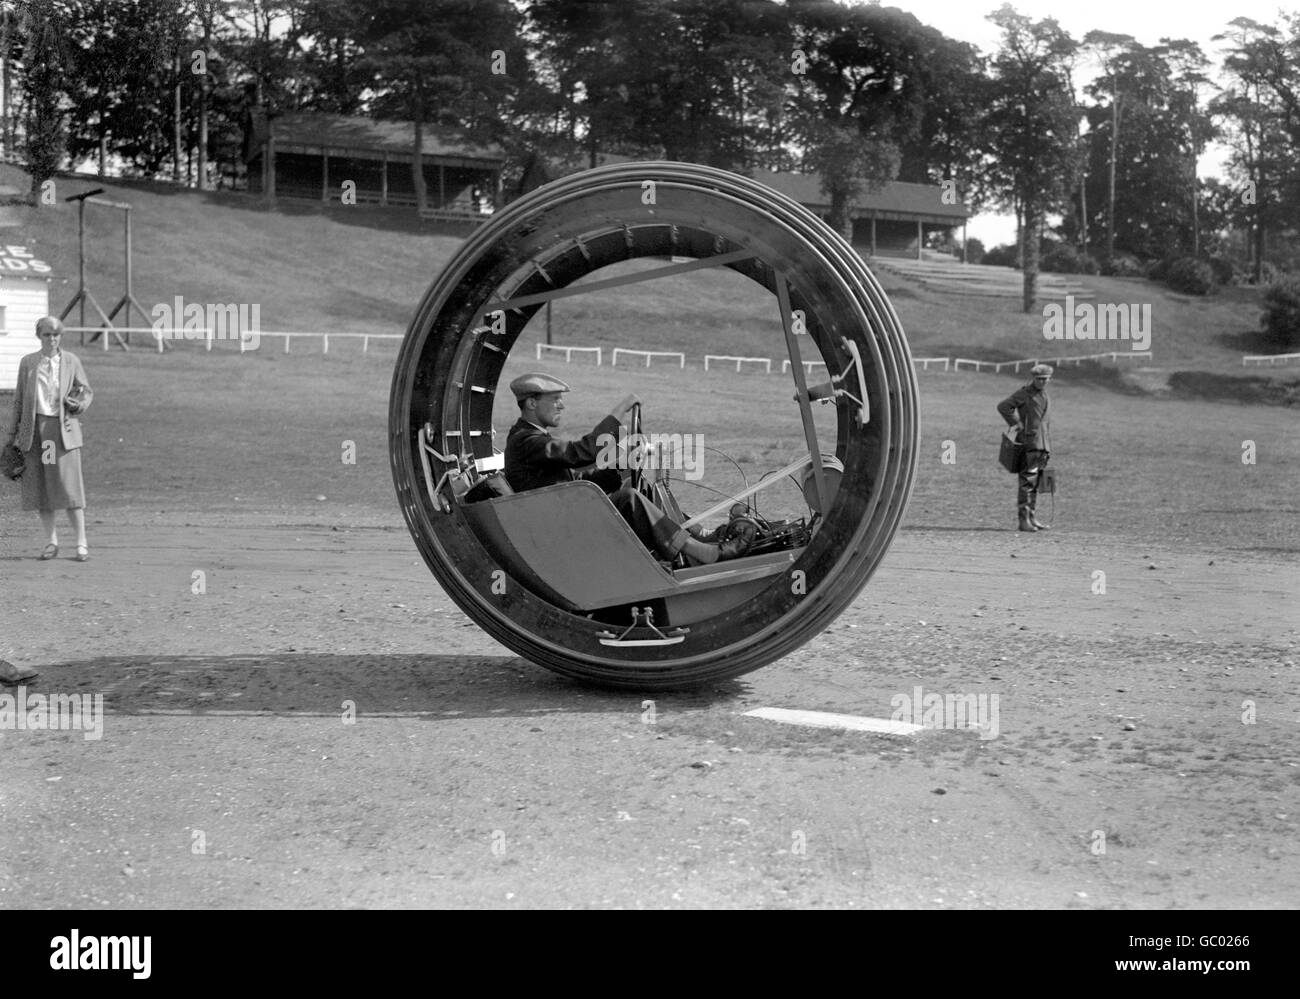 Motor Racing - Dynasphere - Brooklands. The 'Dynasphere', invented by Dr. JH Purves, a mono-wheel vehicle capable of speeds of around 30 mph, at Brooklands. Stock Photo